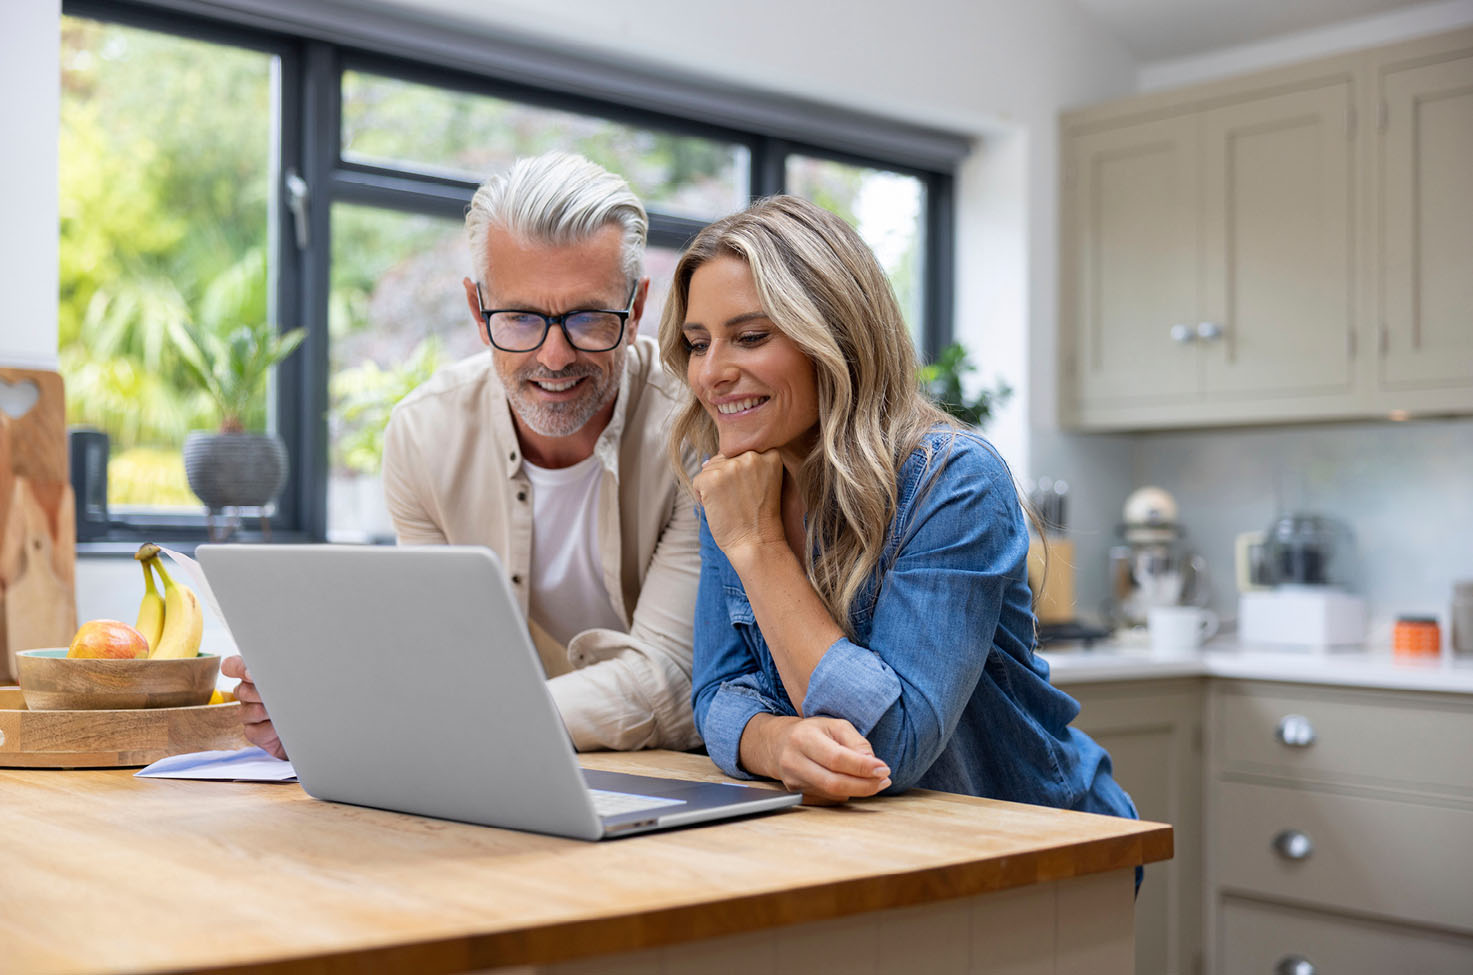 A couple in their modern kitchen looking at their laptop on the kitchen counter and smiling